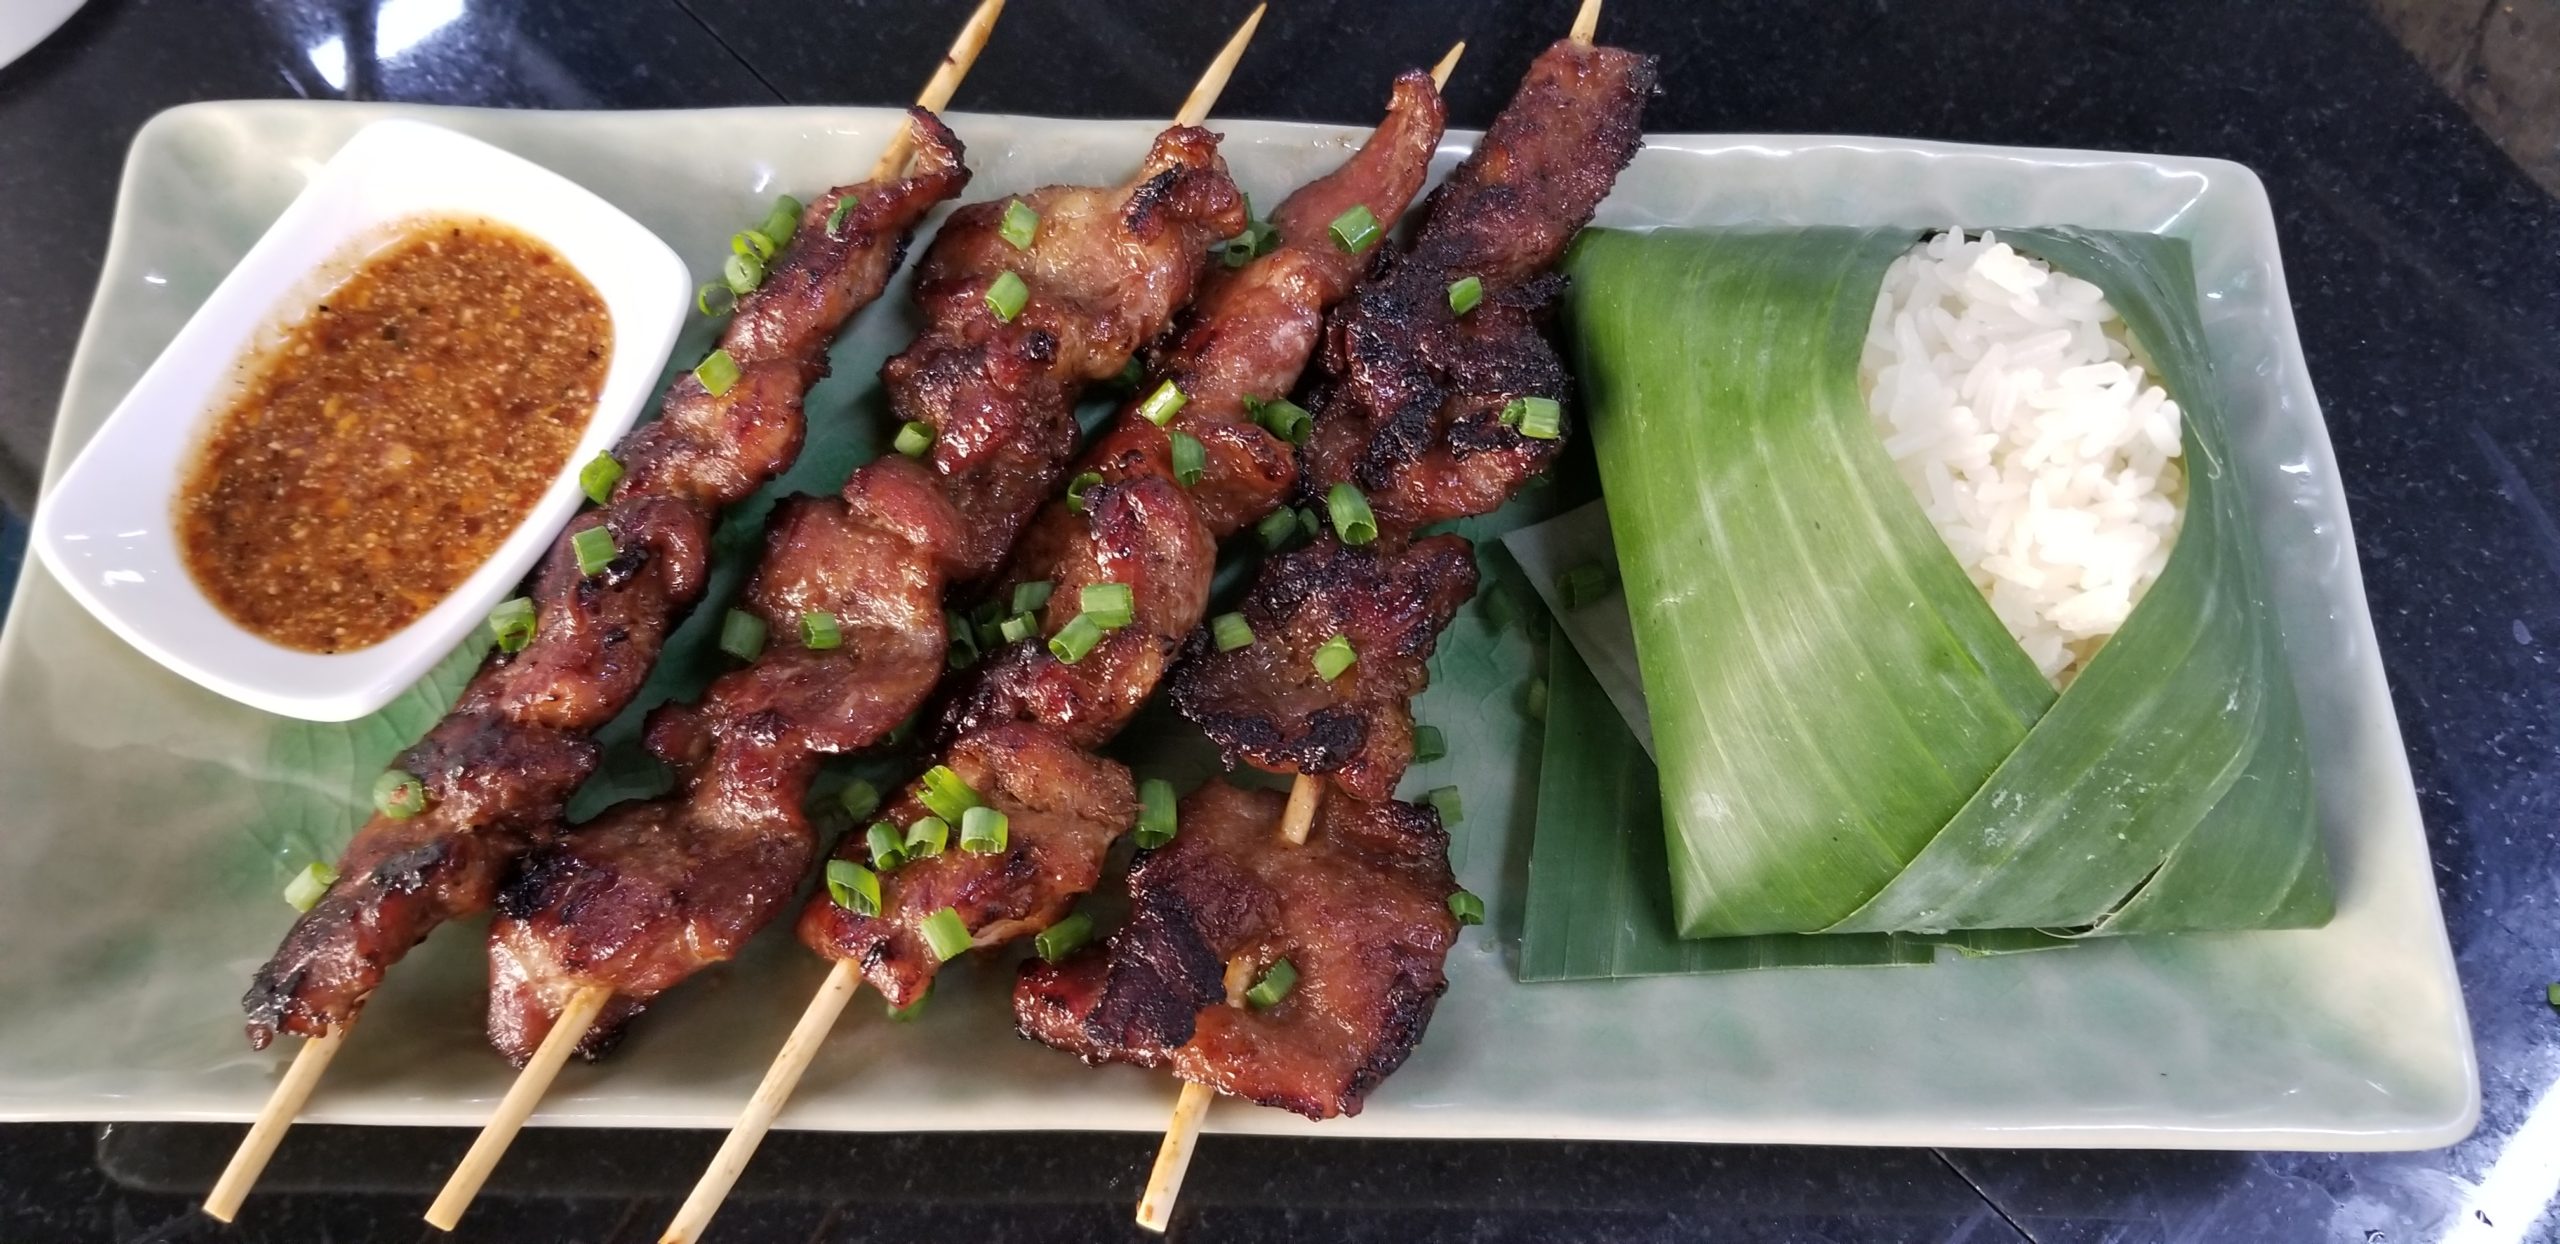 Thai Grilled Pork (Moo Ping) (aka Pork Satay) with Spicy Dipping Sauce